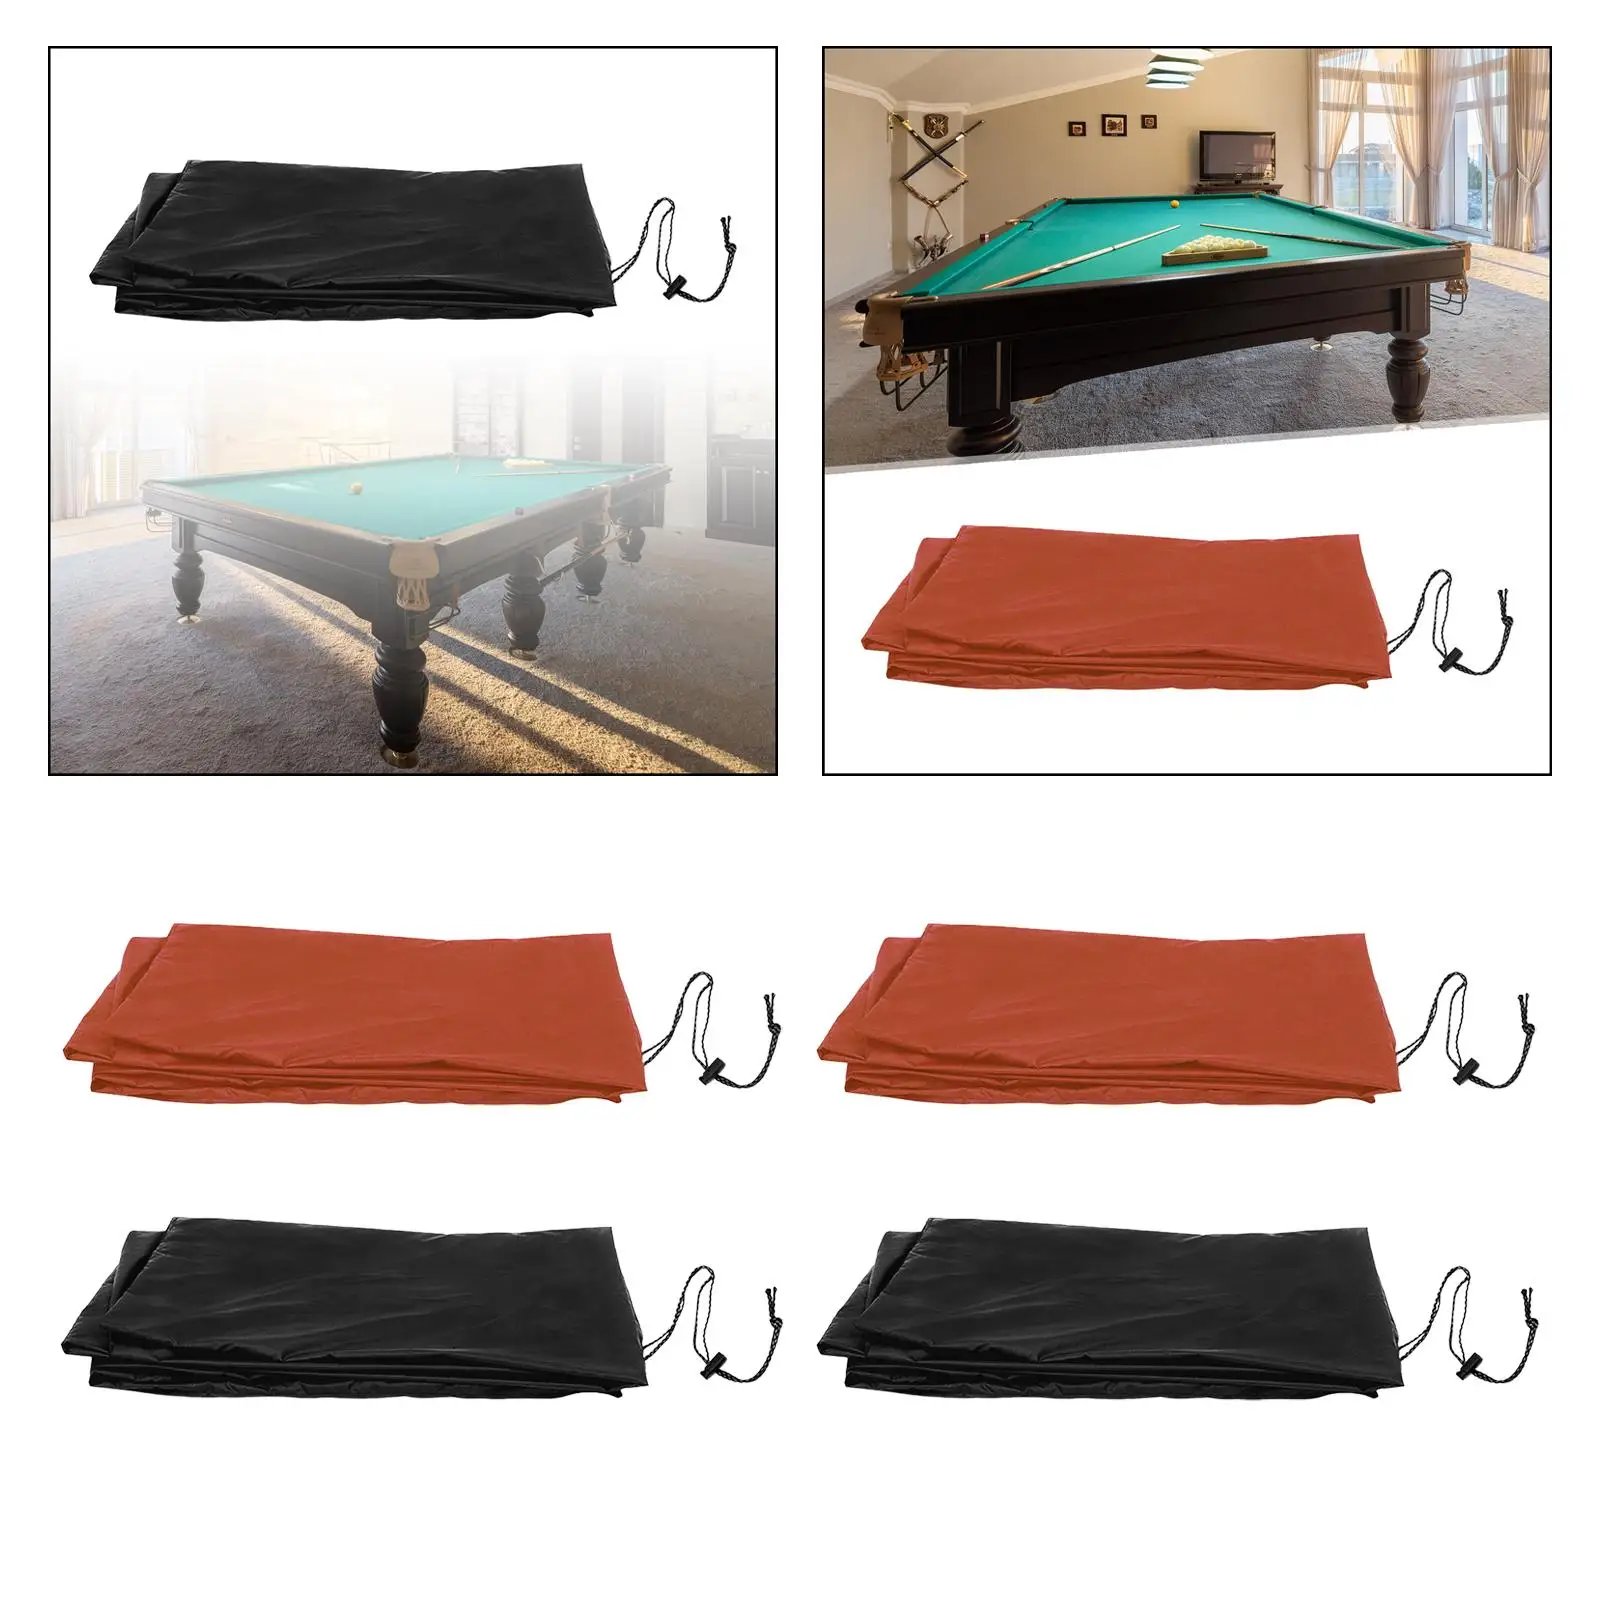 Billiard pool table cover, pool table protection cover, waterproof rain cover